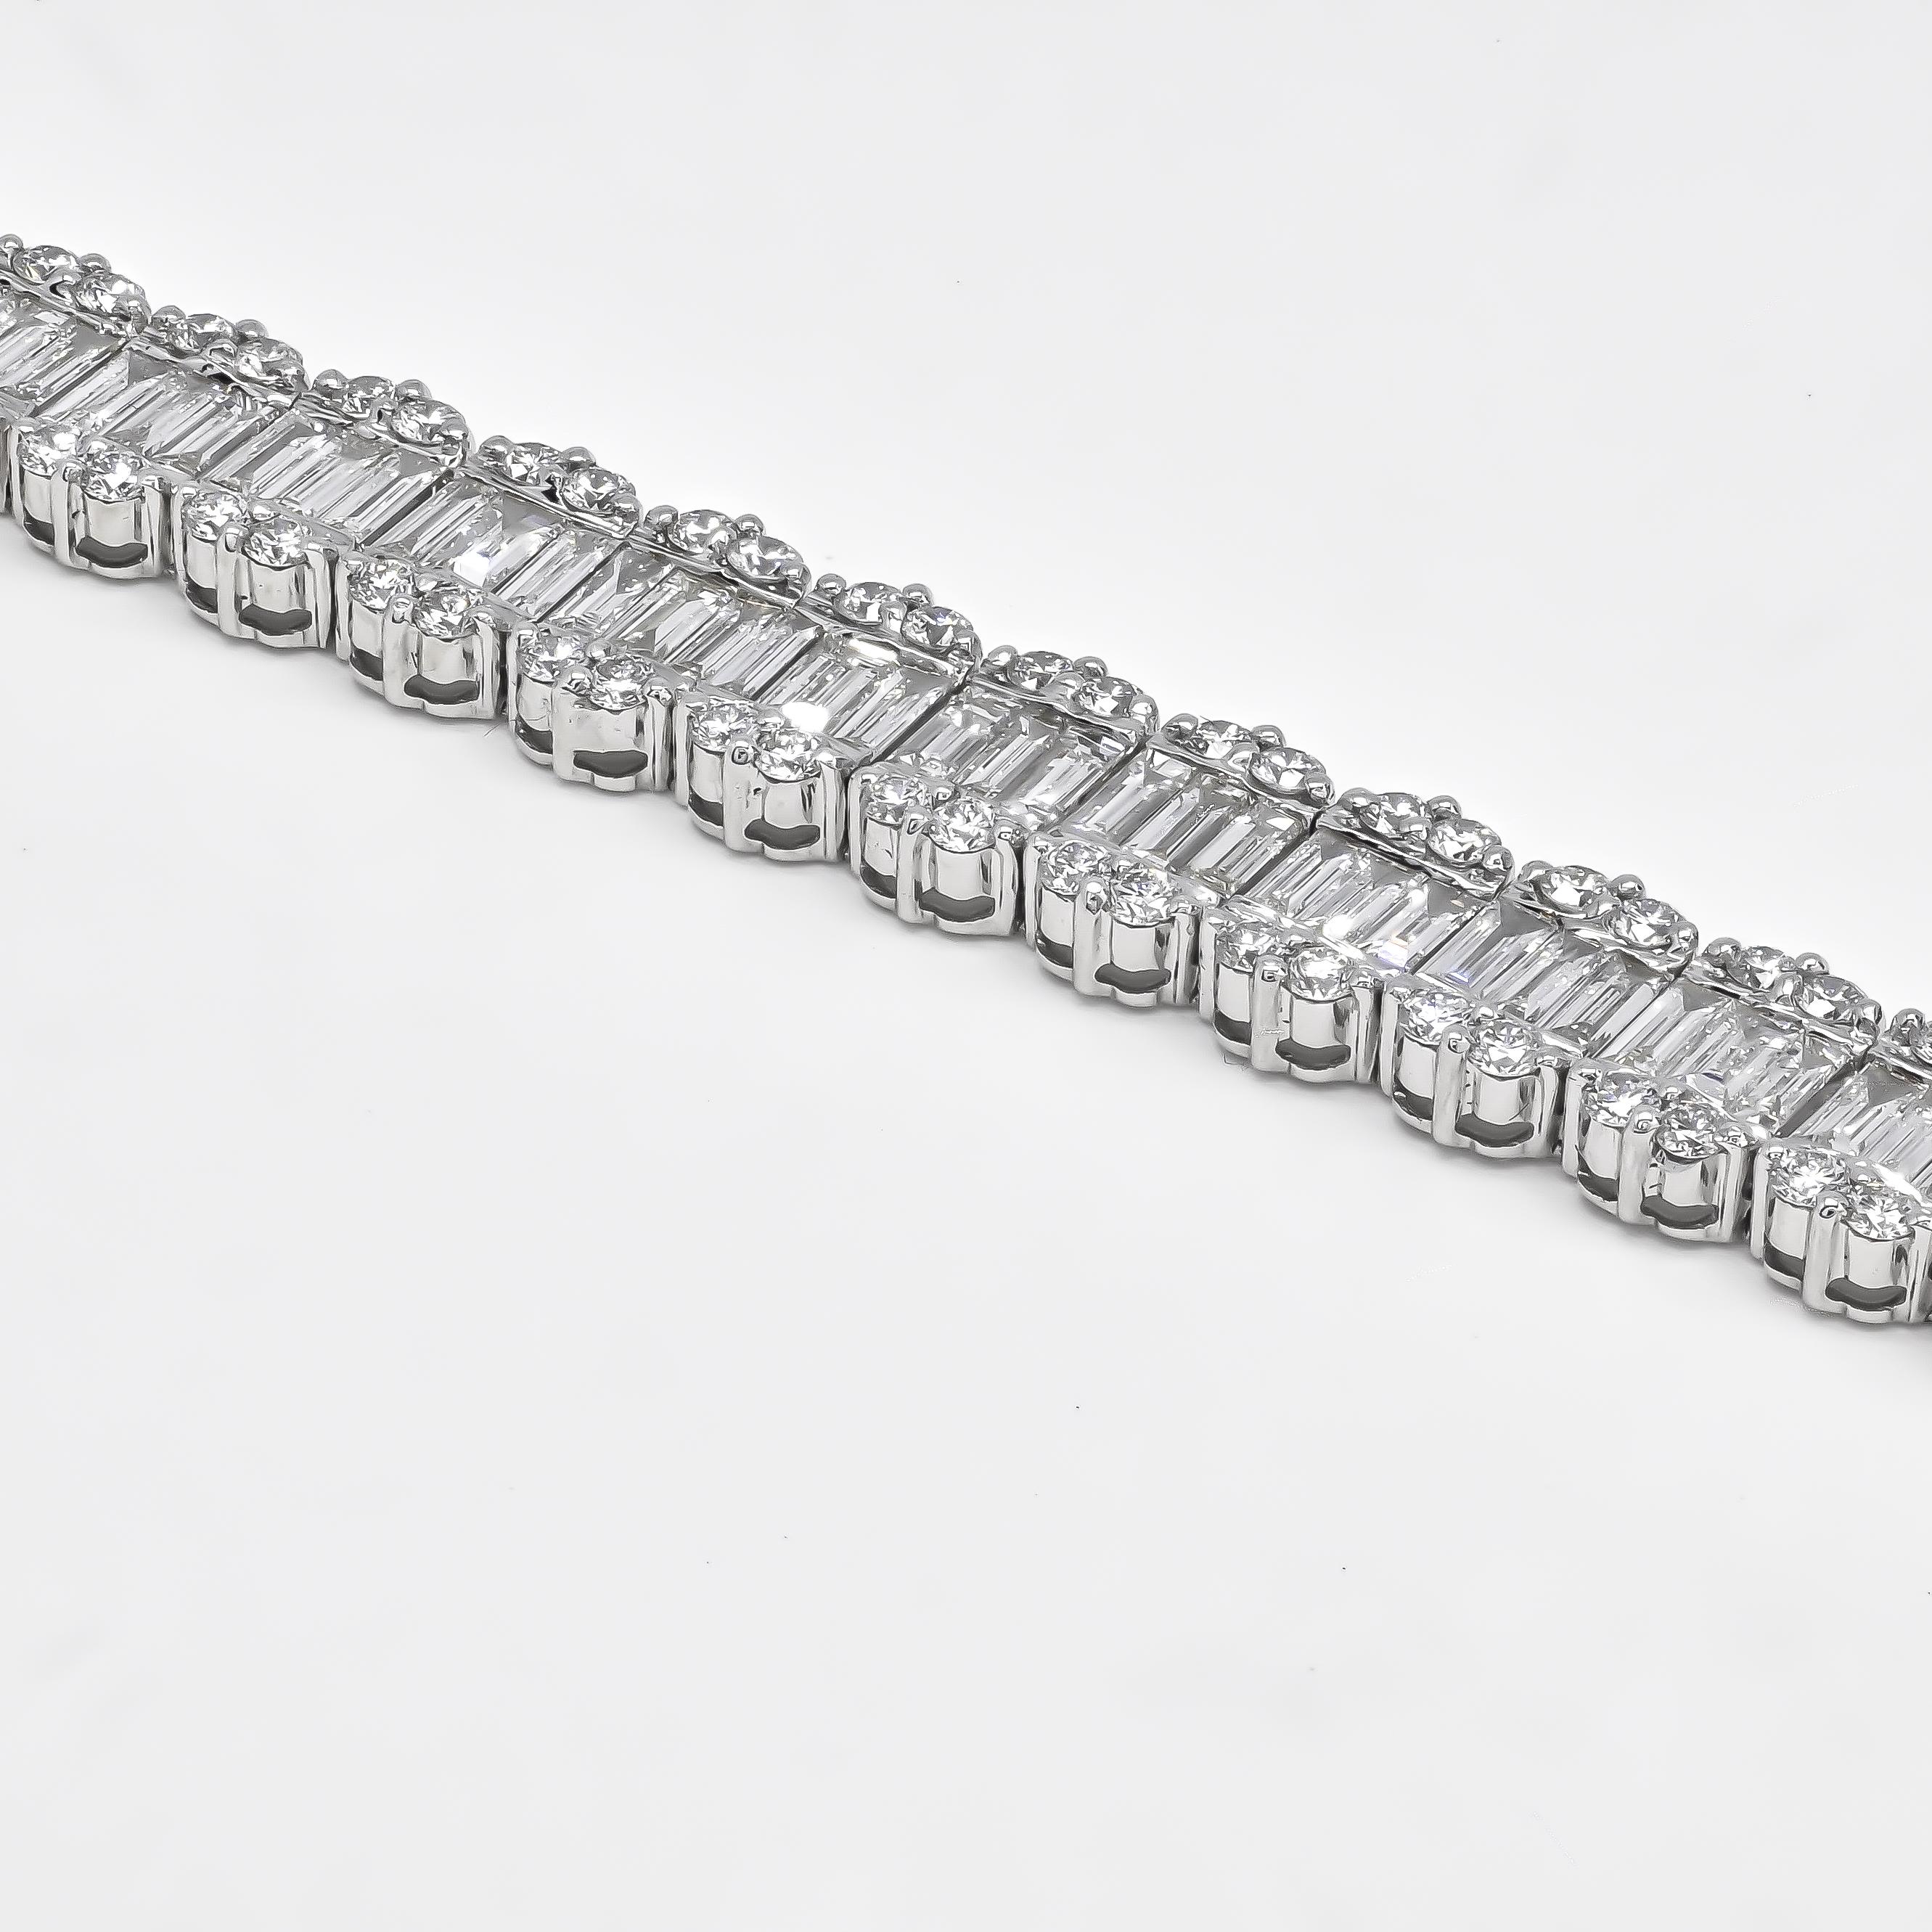 A chic row of channel set baguette diamonds flanked by classic round brilliant diamonds in a dome shaped setting, the bracelet embodies simple elegance at any occasion.

Make sparkle a priority with this glamorous diamond tennis bracelet.

Artfully